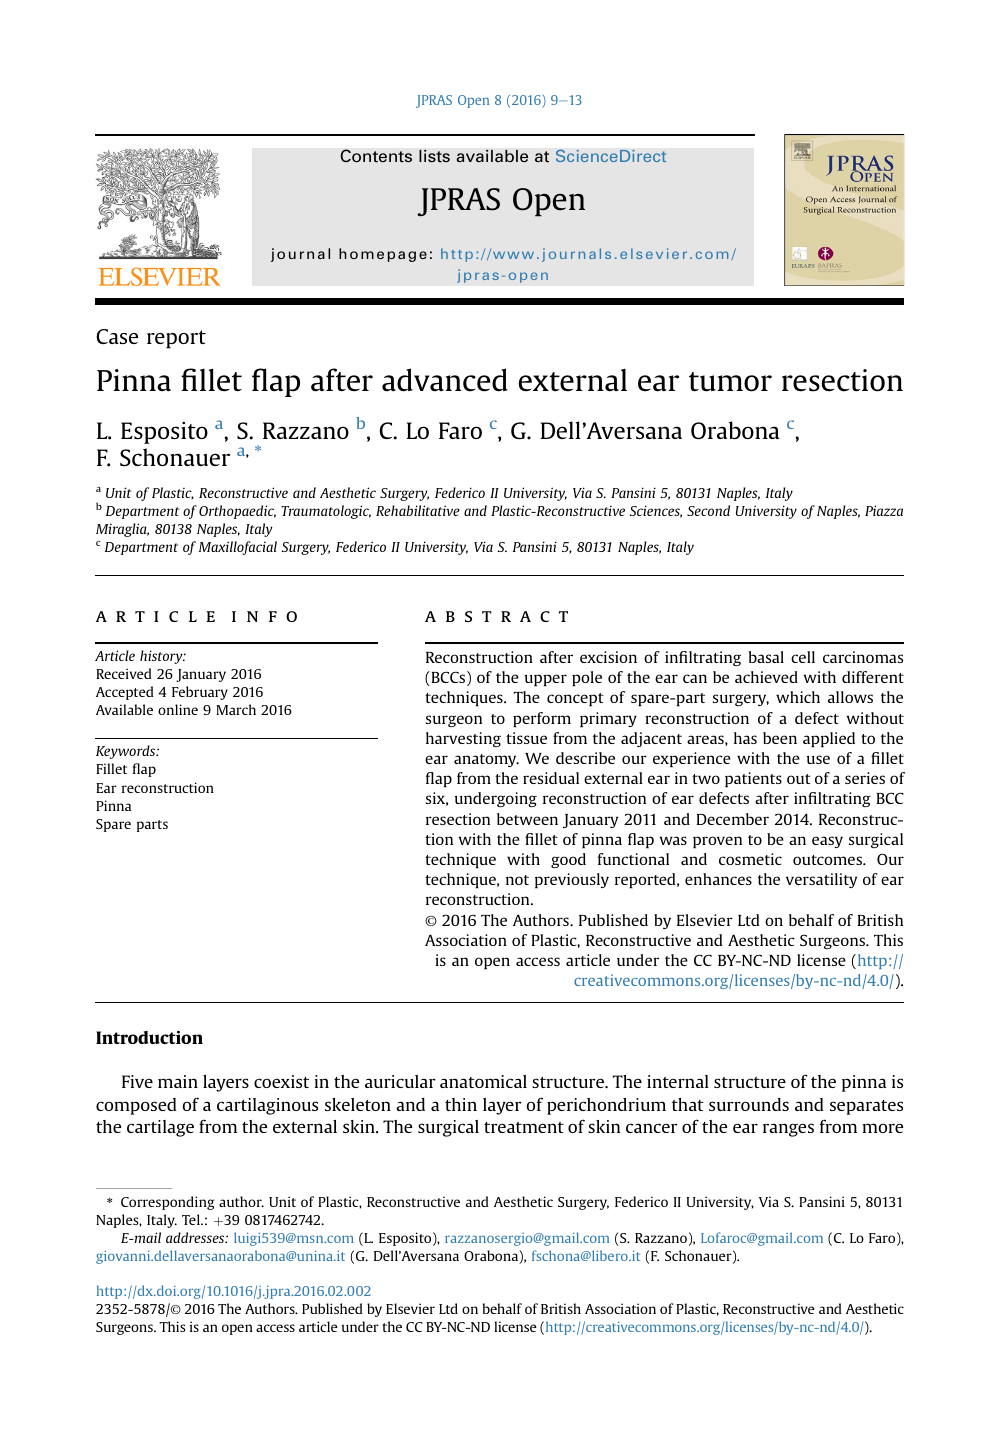 Pinna Fillet Flap After Advanced External Ear Tumor Resection Topic Of Research Paper In Clinical Medicine Download Scholarly Article Pdf And Read For Free On Cyberleninka Open Science Hub